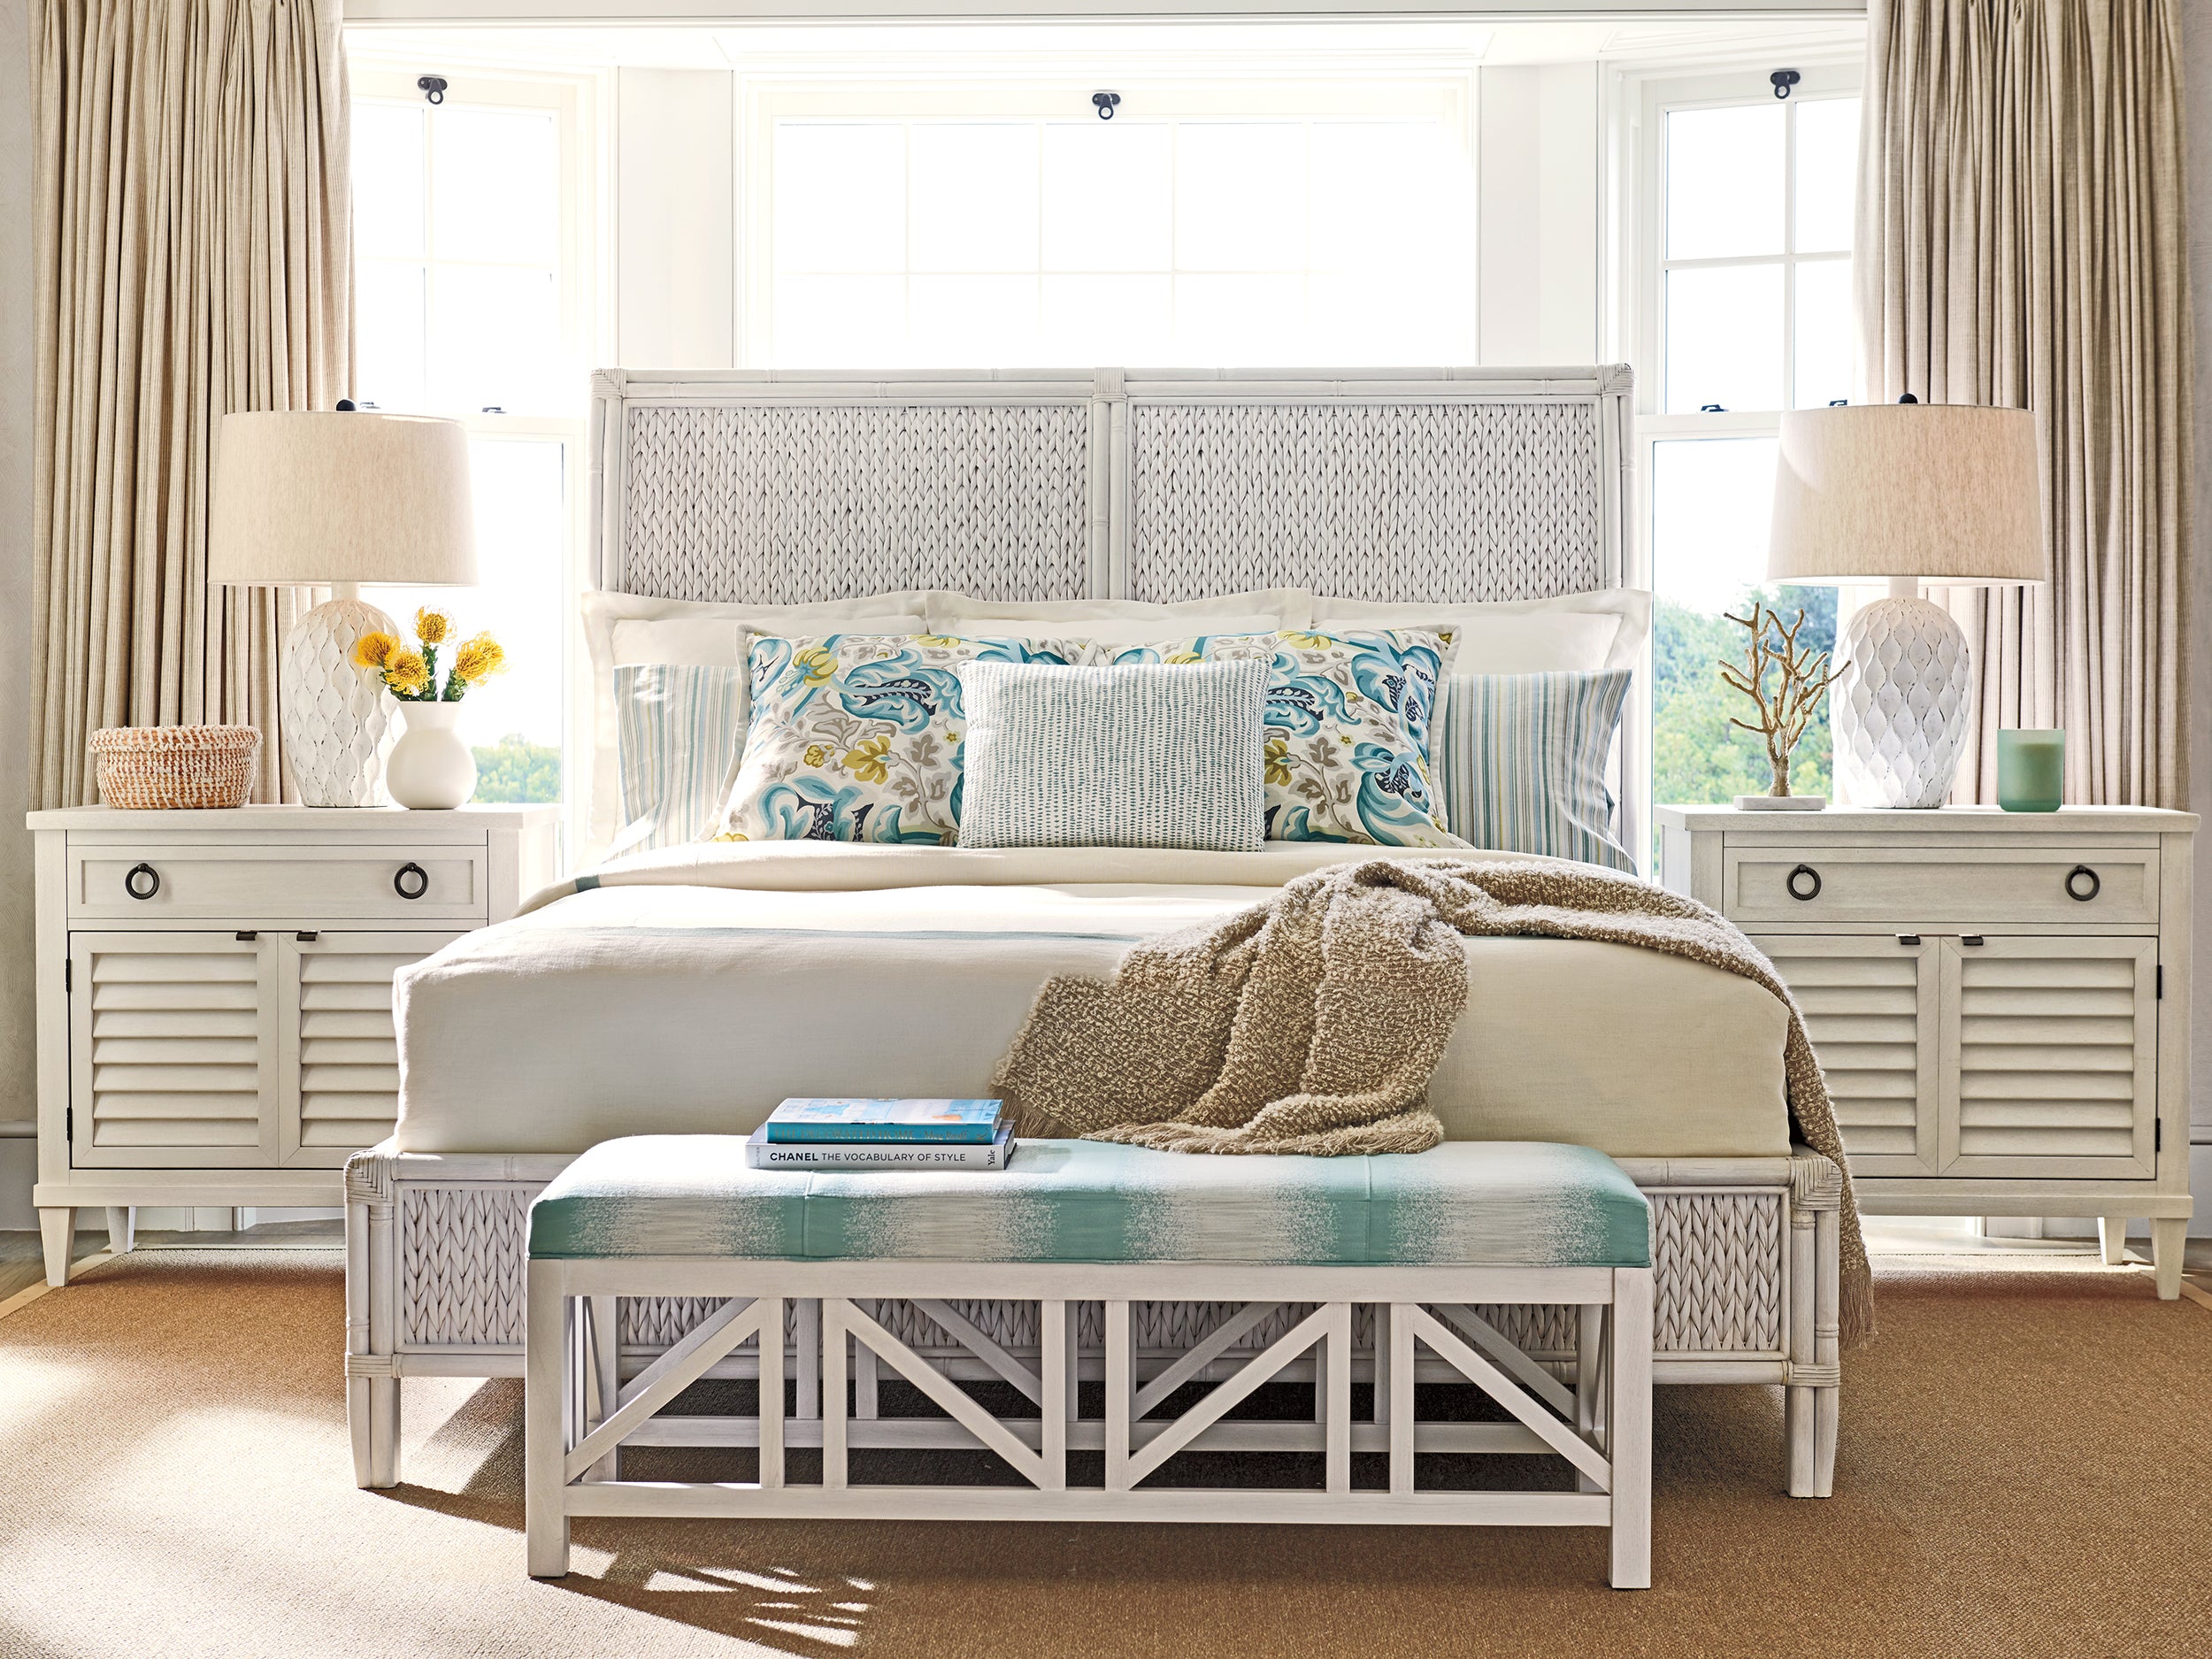 A coastal style bedroom from Tommy Bahama Home's Ocean Breeze collection featuring a white bed with matching nightstands.